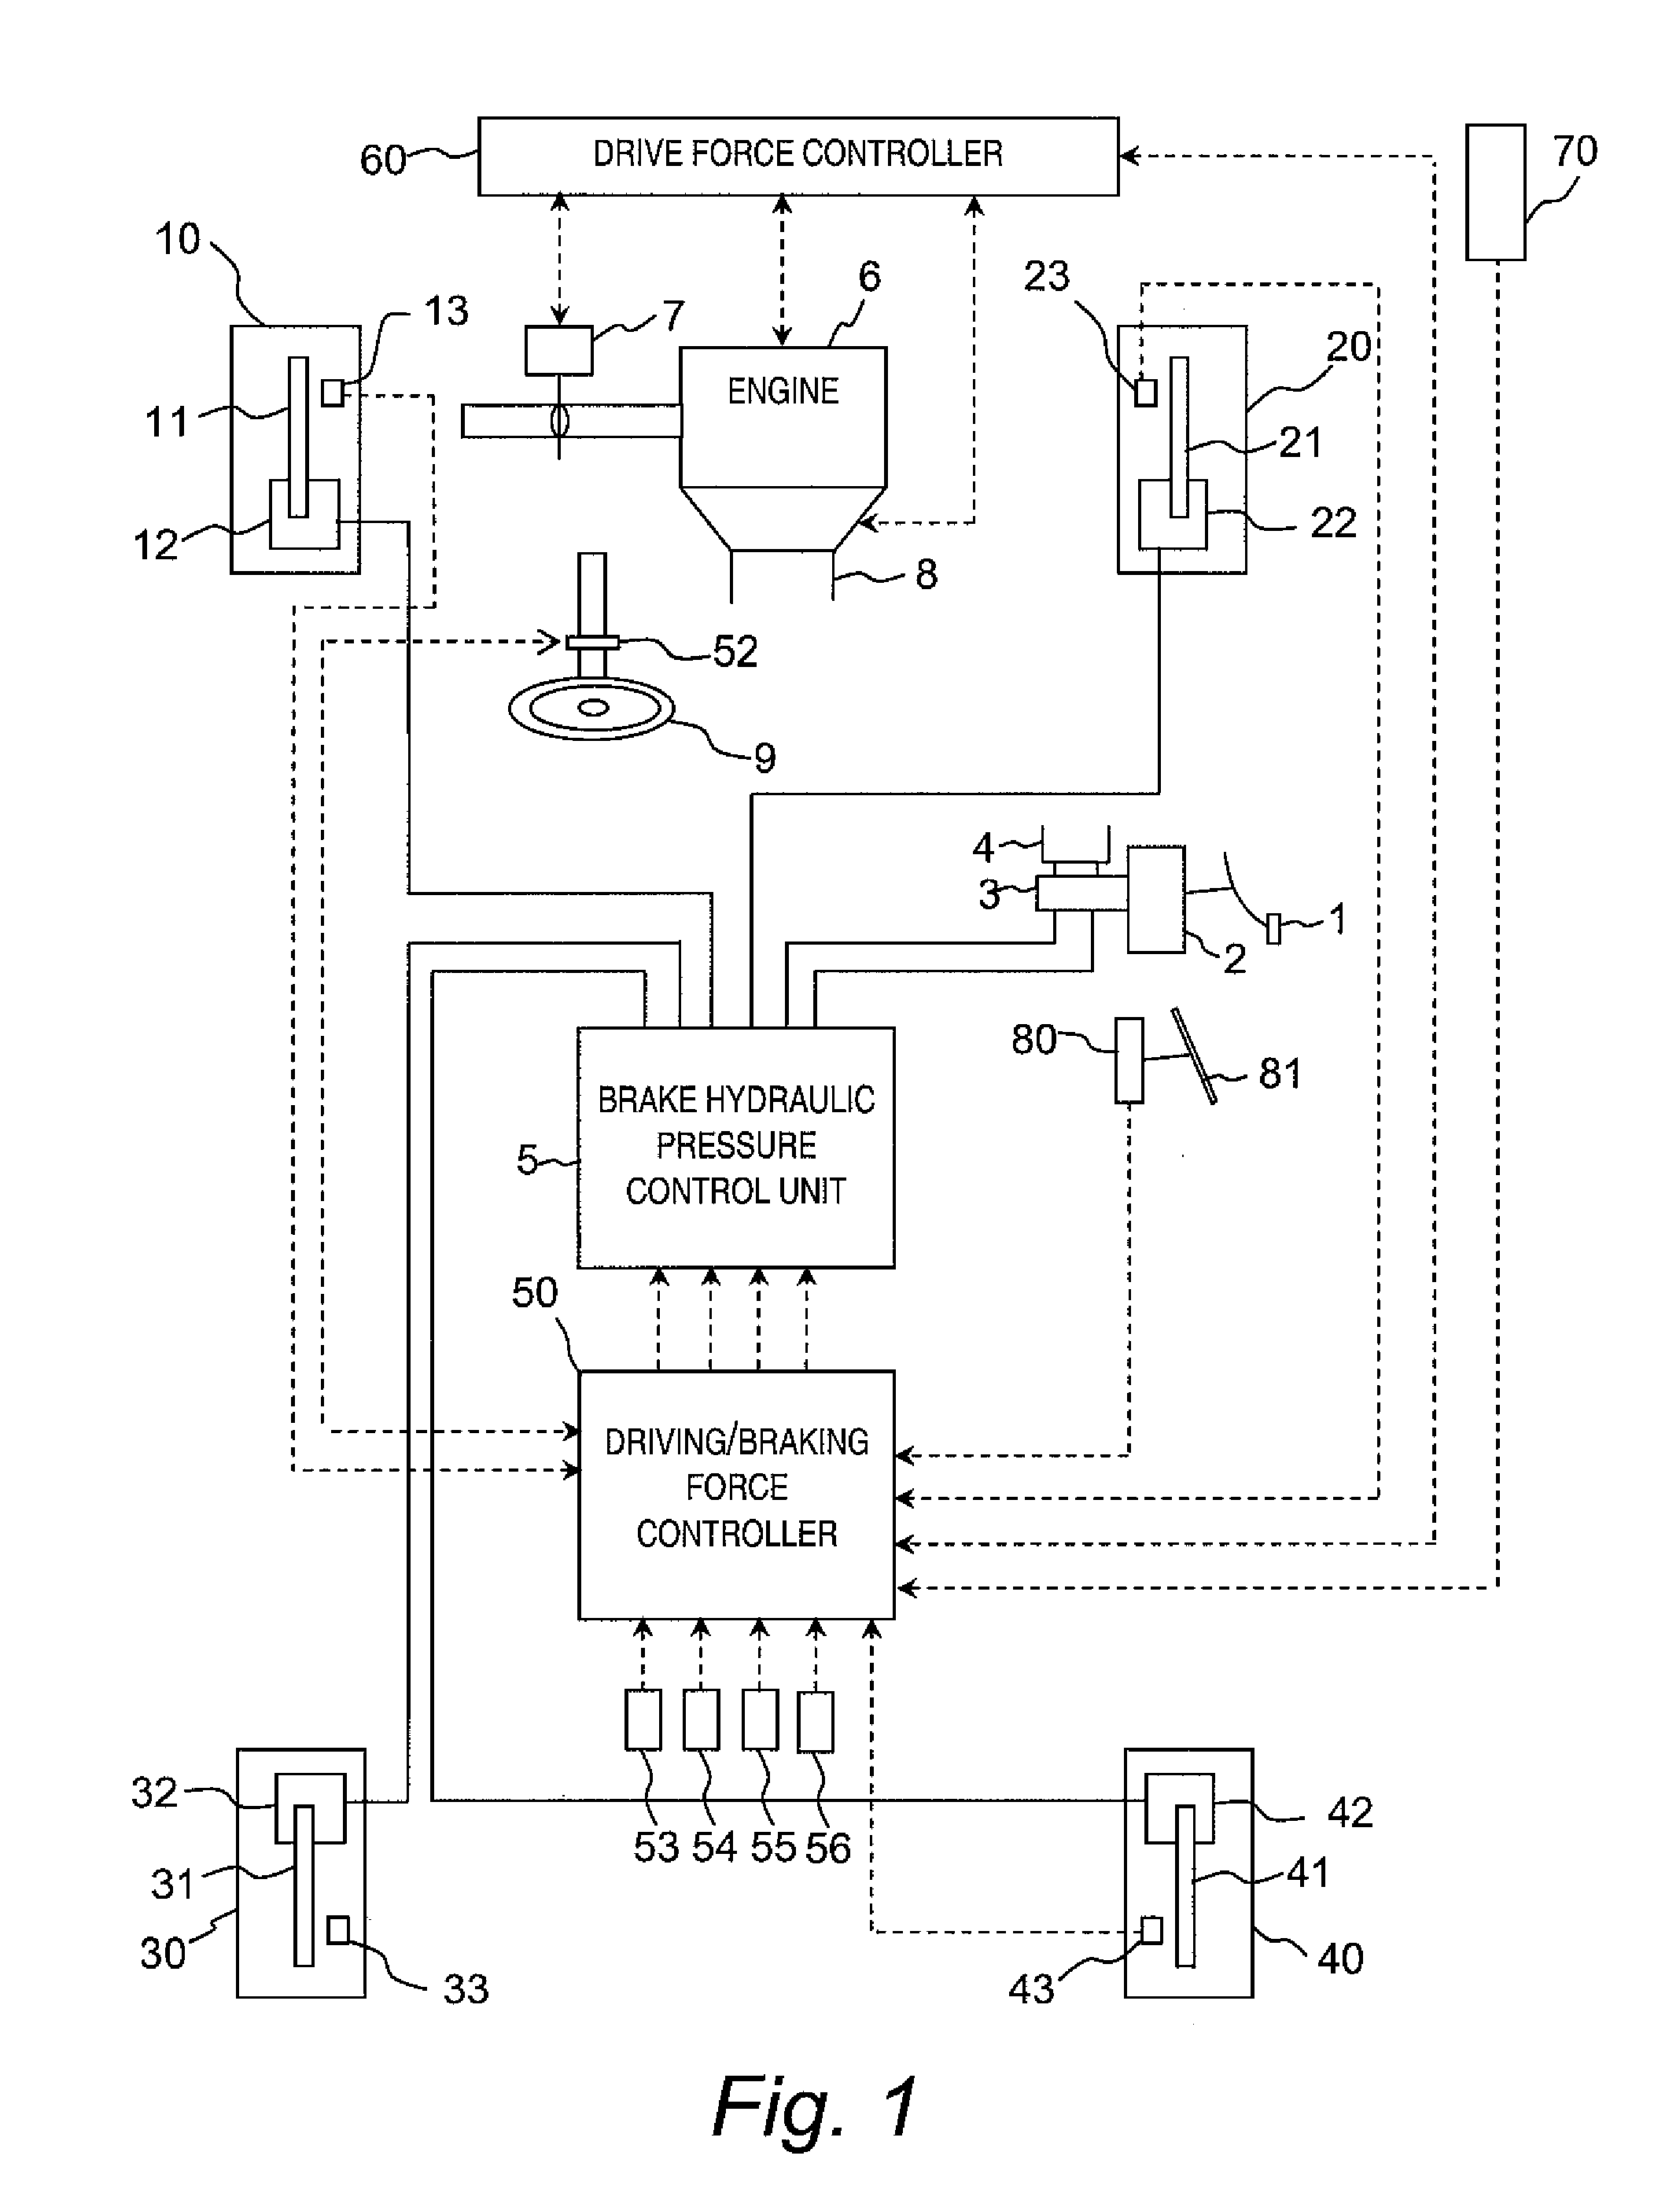 Headway maintenance system and method